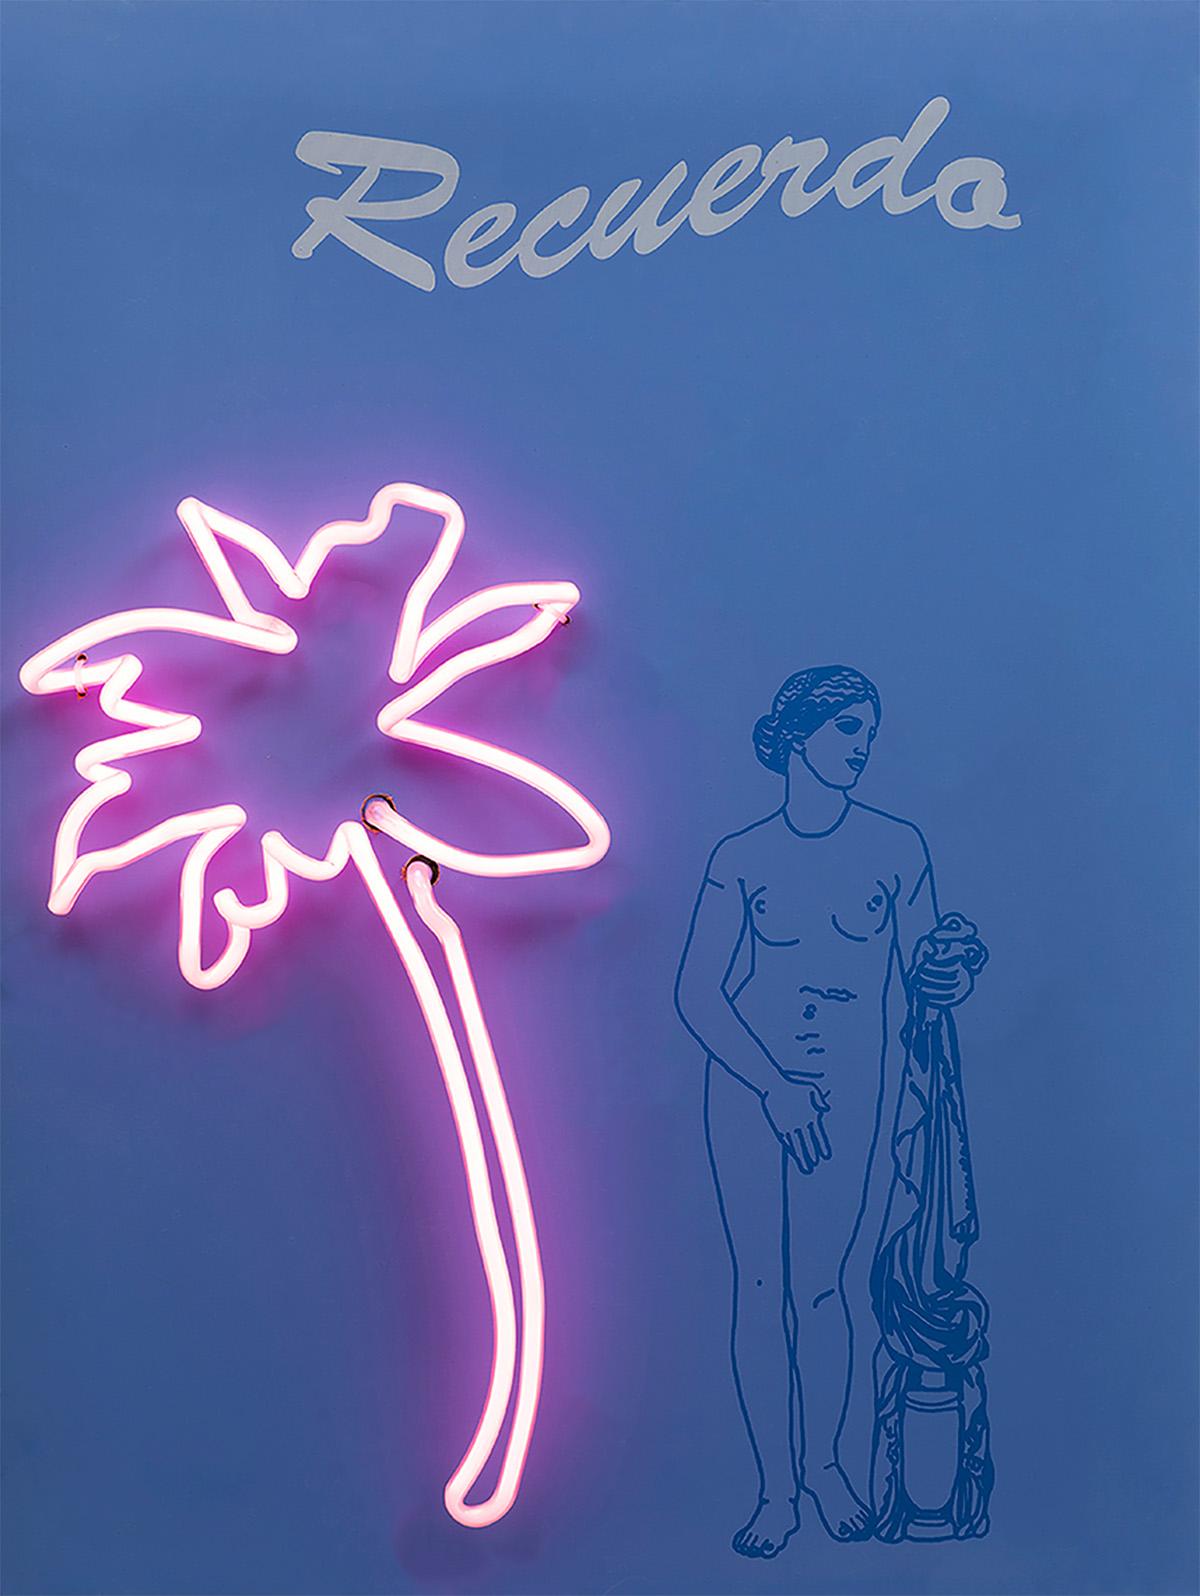 Ilusión and Recuerdo Aphrodite Diptych, 2019  Paloma Castello 
From the series Neon Classics
Screen printing with neon lights
Overall size: 24 H in x 36.2 W x 5.9 D in. 
Individual size: 24 H in x 18.1 W x 5.9 D in. 
Edition 6/10

In her work She